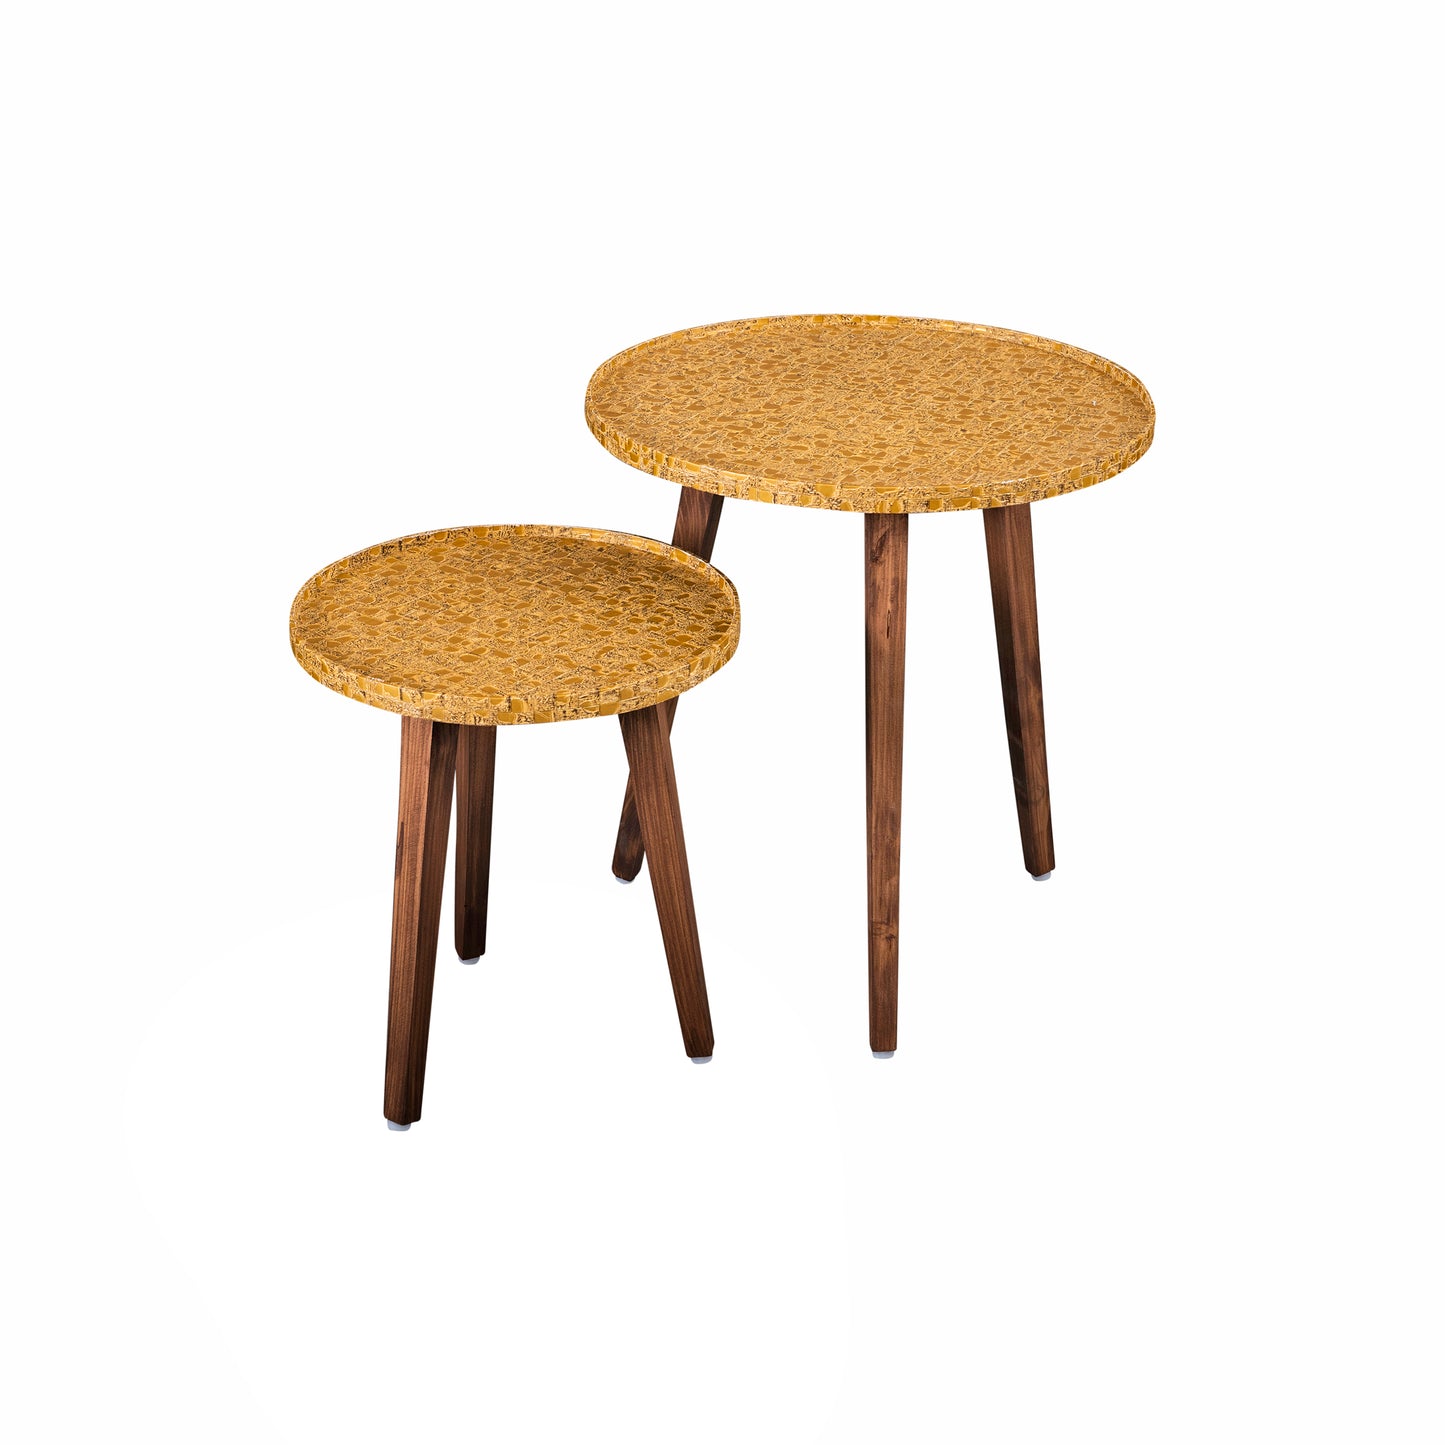 A Tiny Mistake Sunehri Wooden Nesting Tables (Set of 2), Living Room Decor